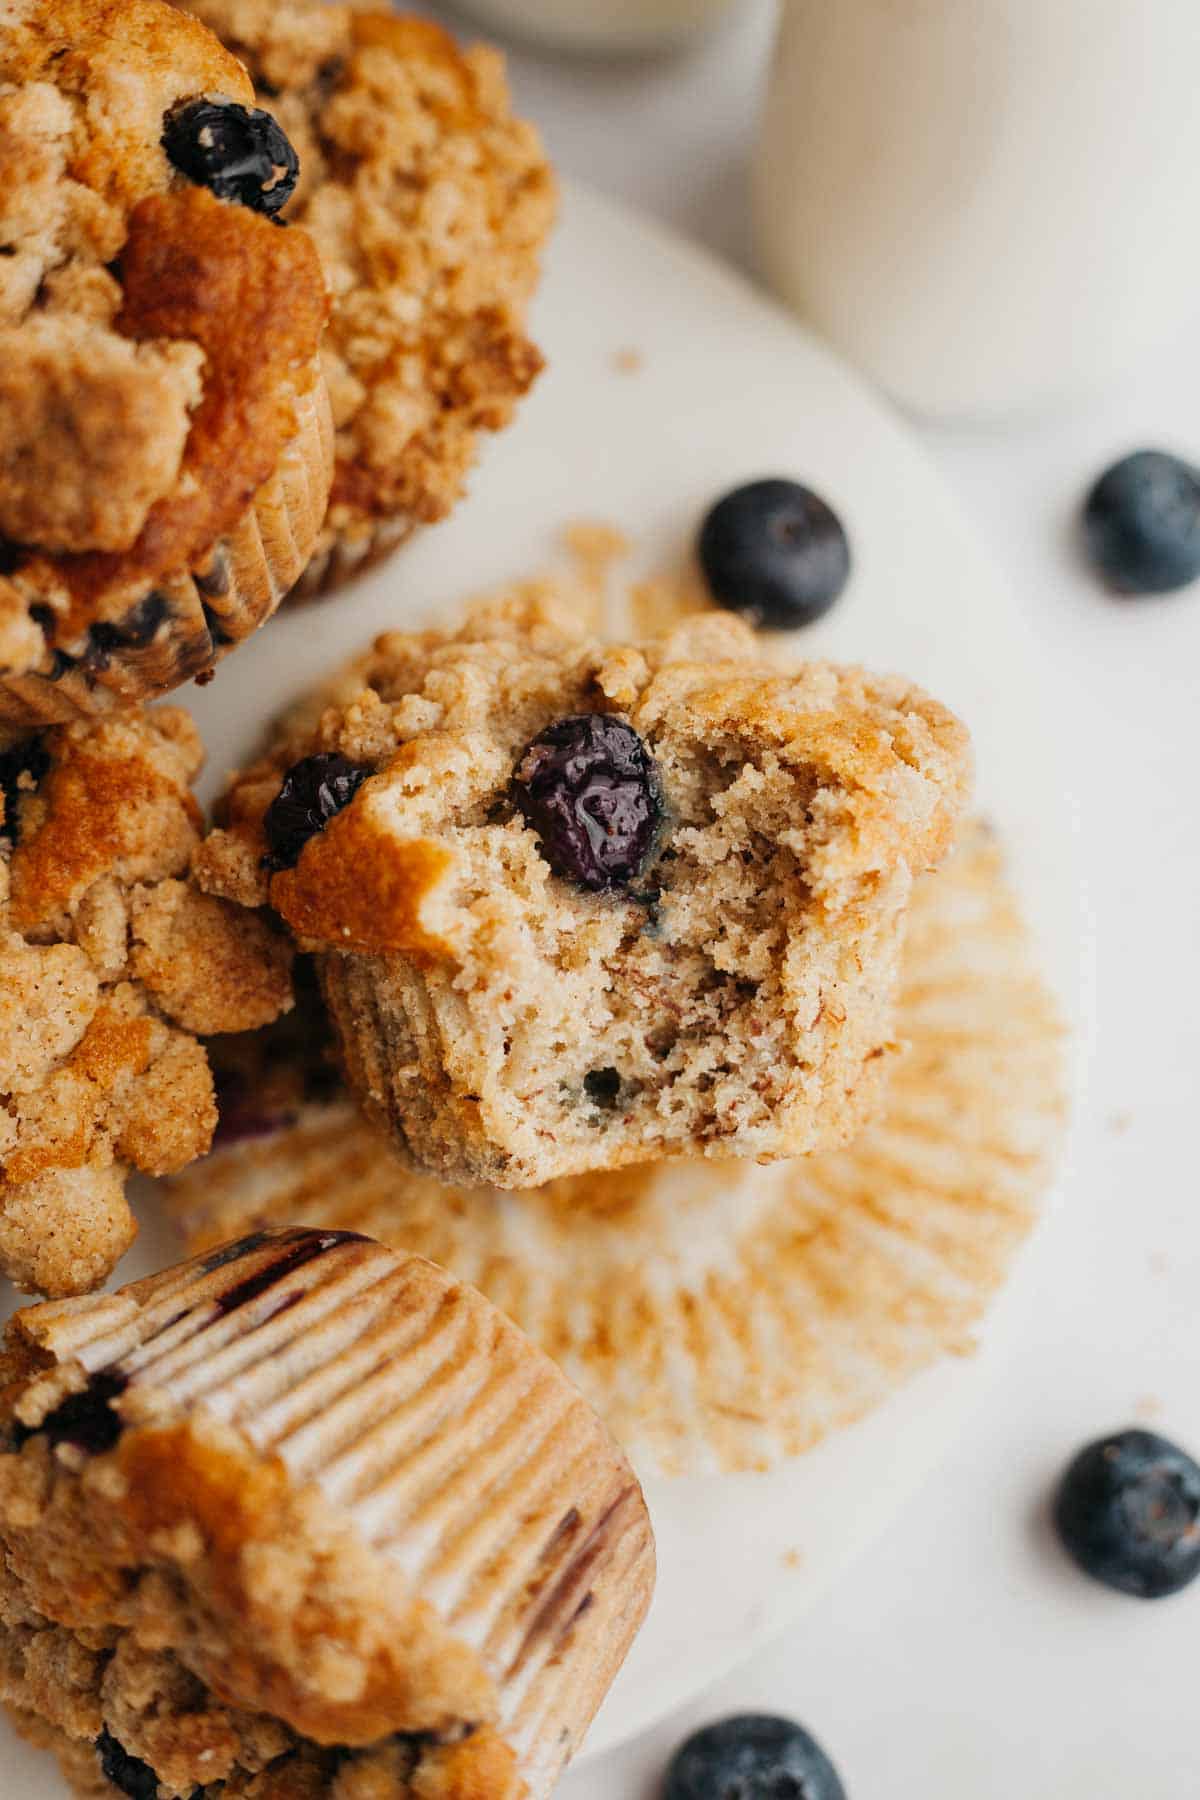 A close up of a blueberry muffin with a bite taken out of it.